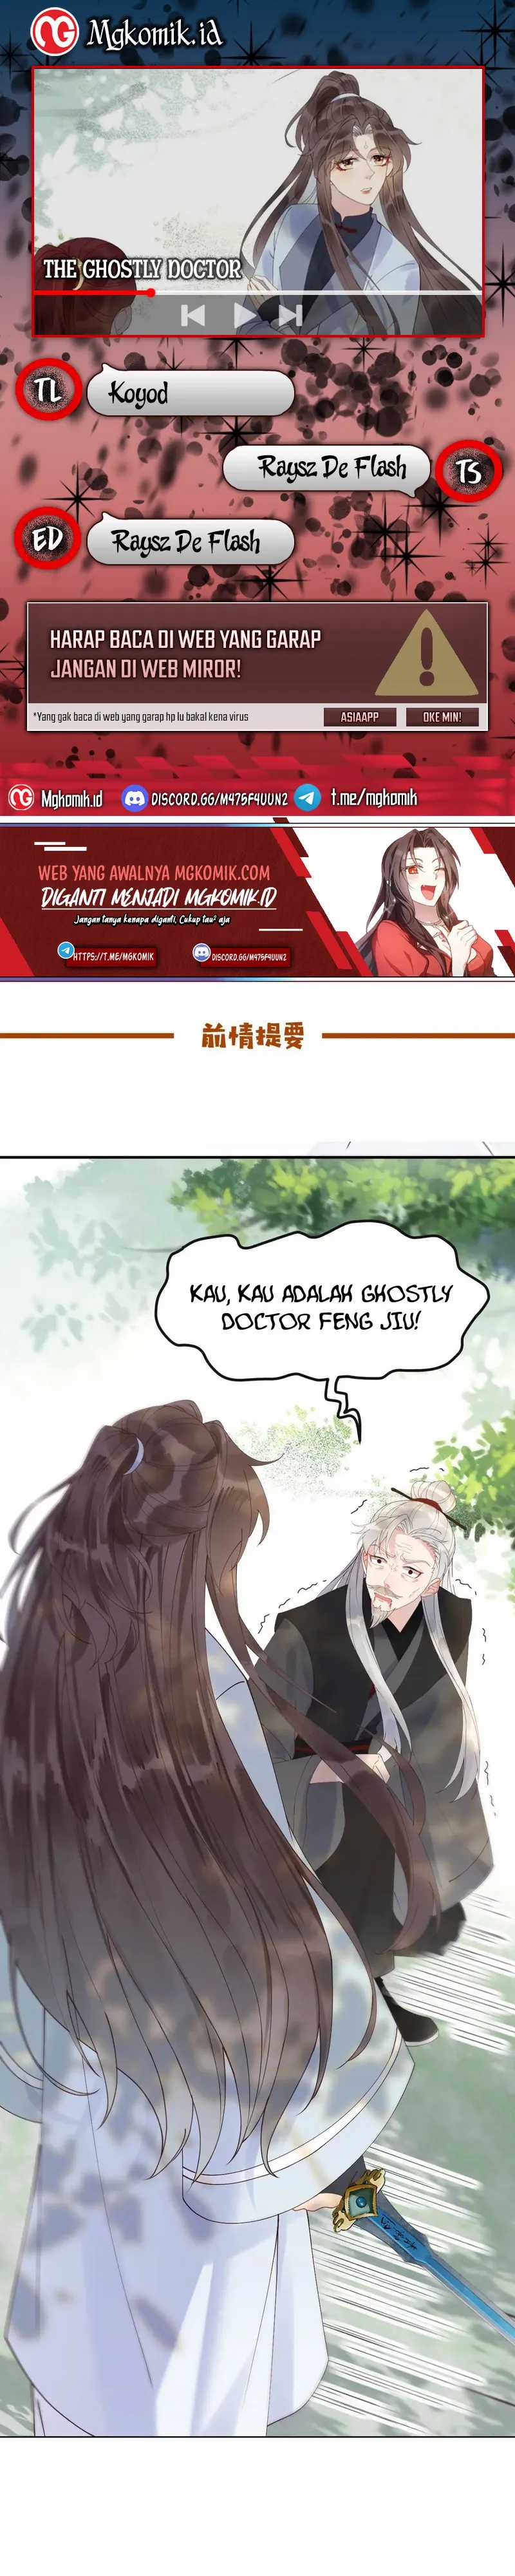 The Ghostly Doctor Chapter 605